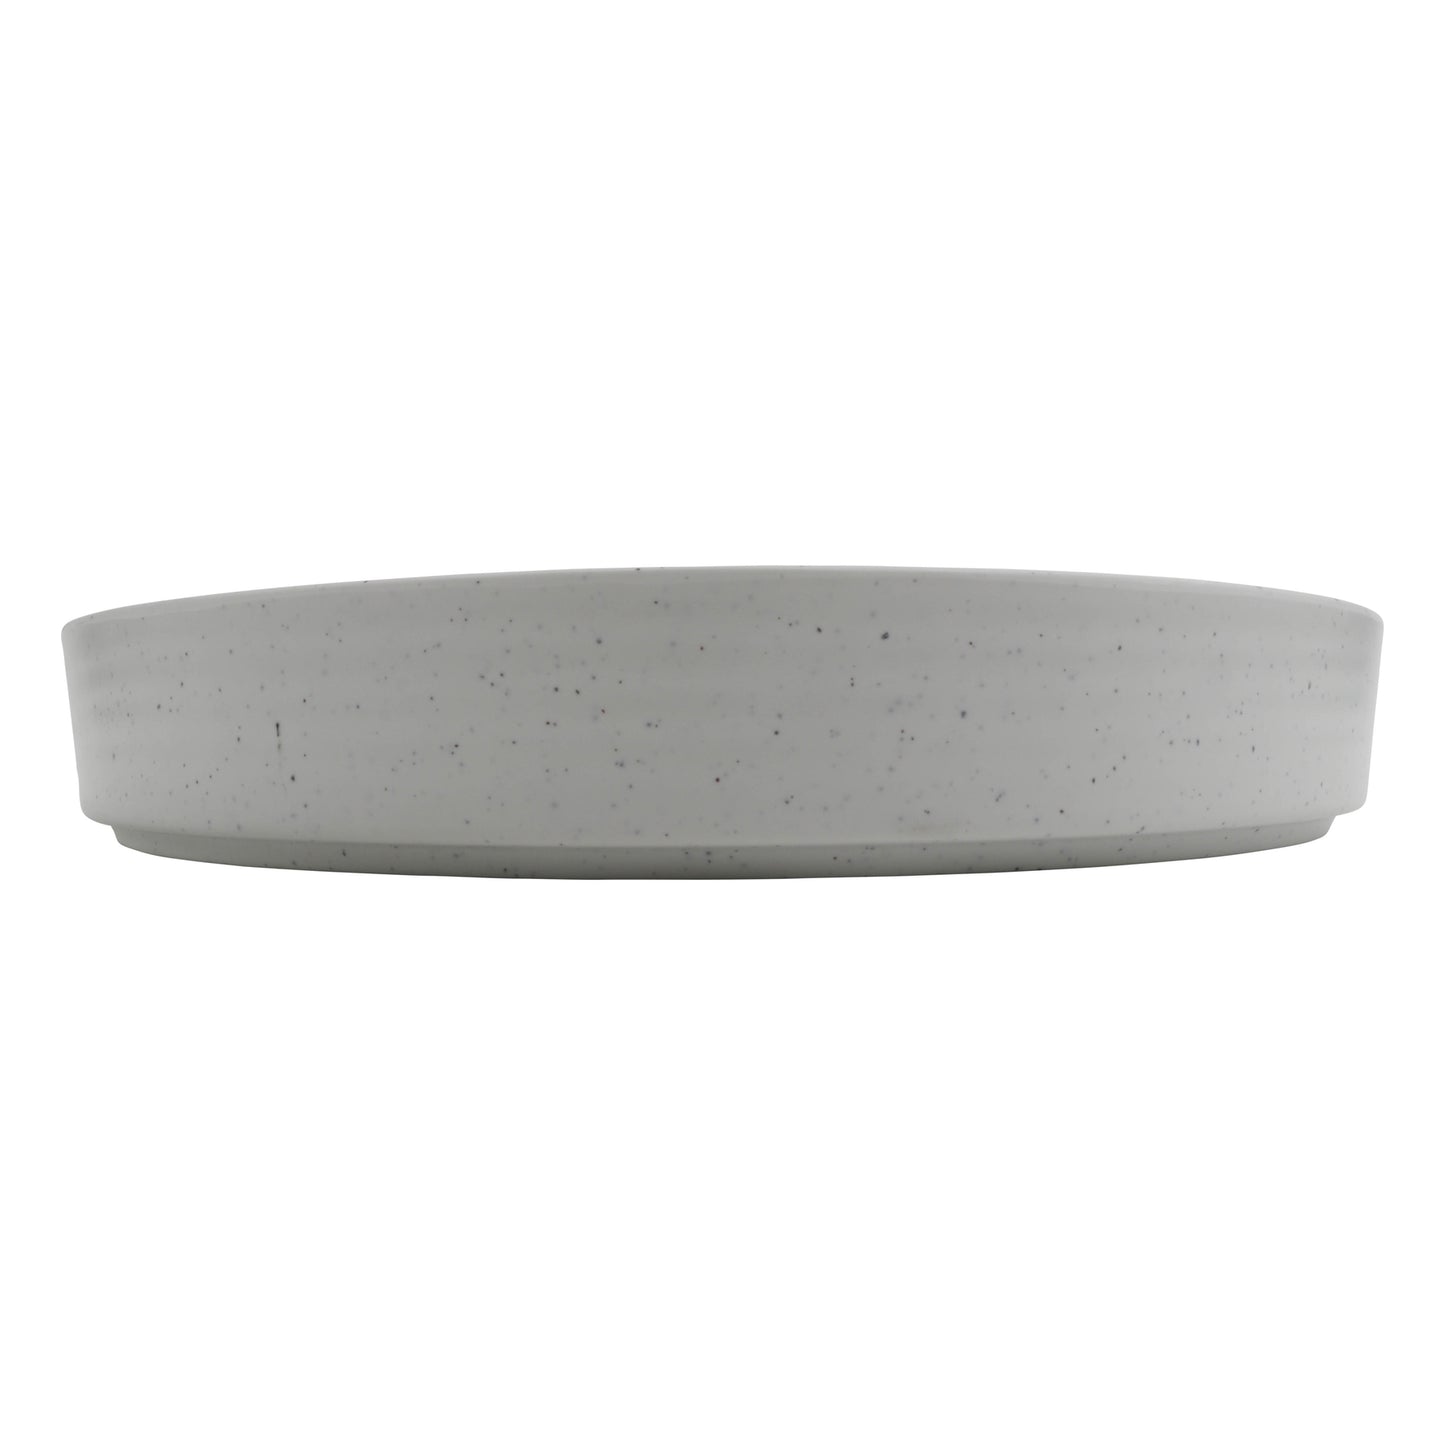 16" infuse stone natural black melamine platter with edge rim (extra large), 16"L x 16"W x 3"H, GET, cheforward